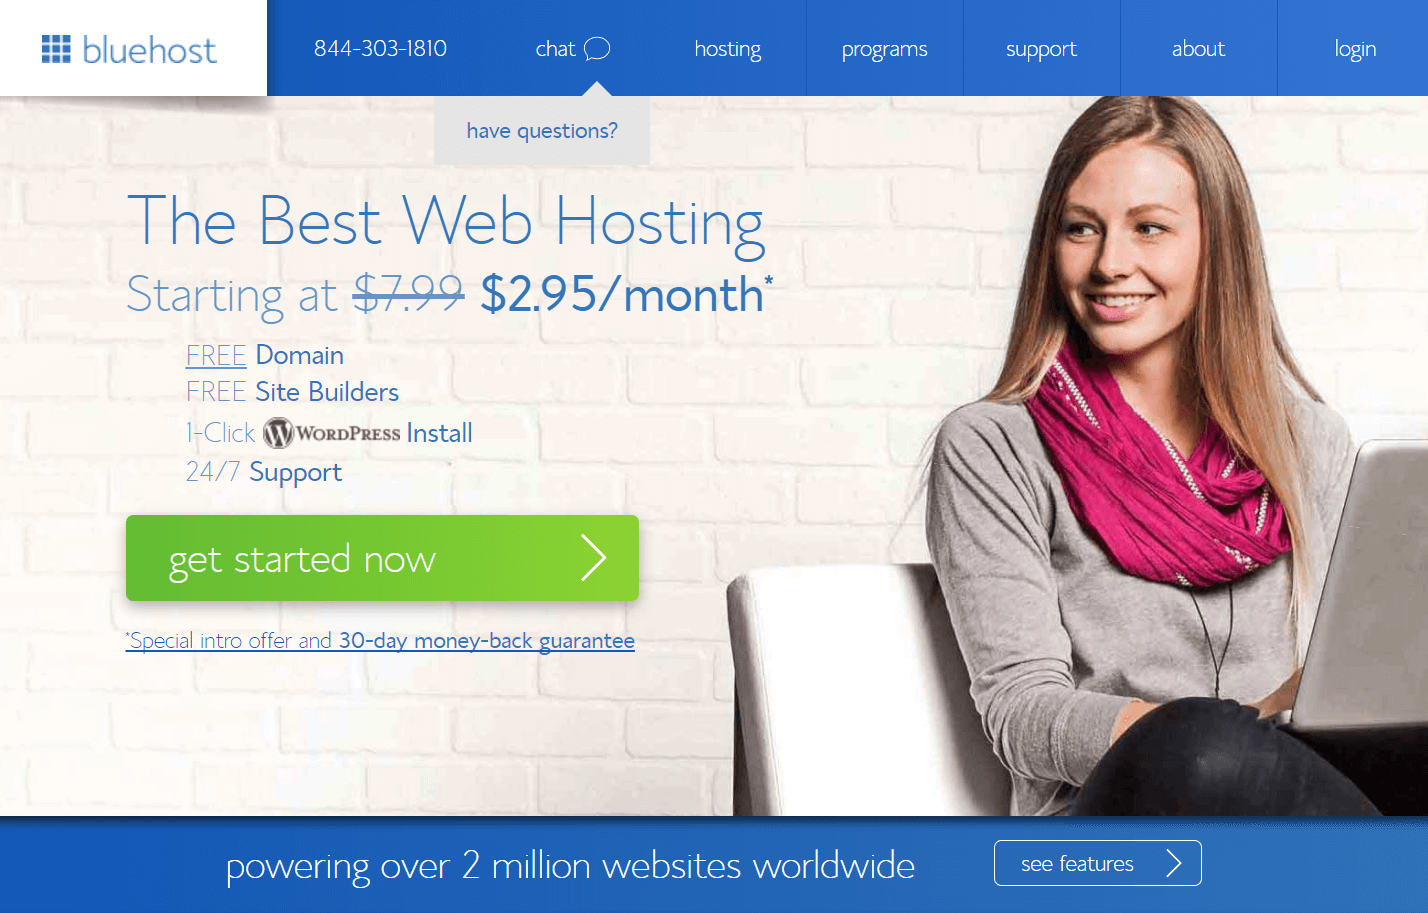 The Bluehost website.